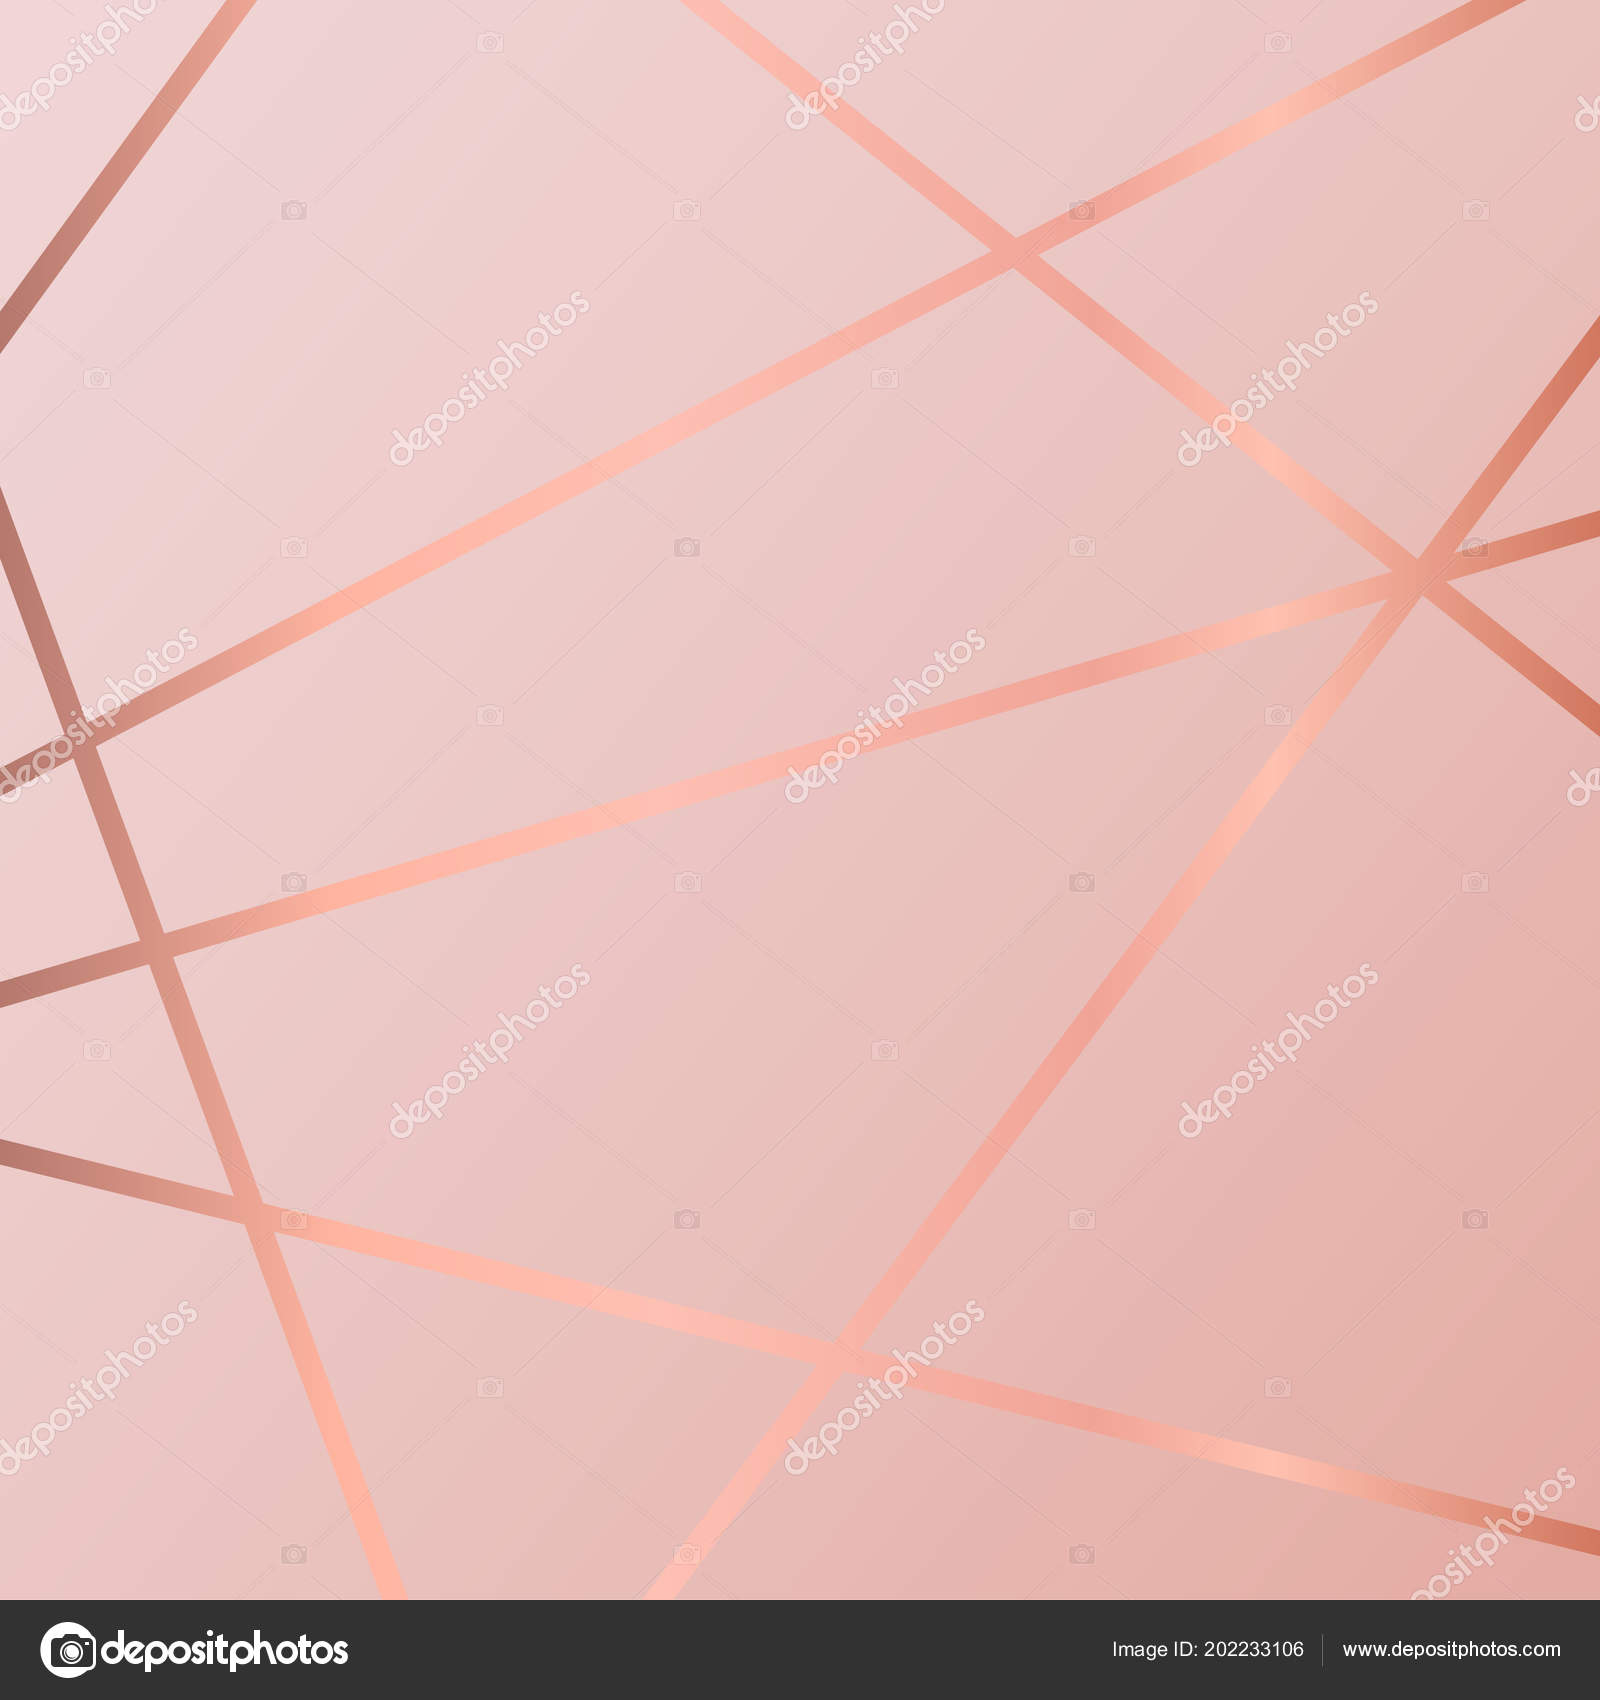 Abstract Geometric Background Pastel Pink Color Vector Image By C Lepusinensis Vector Stock